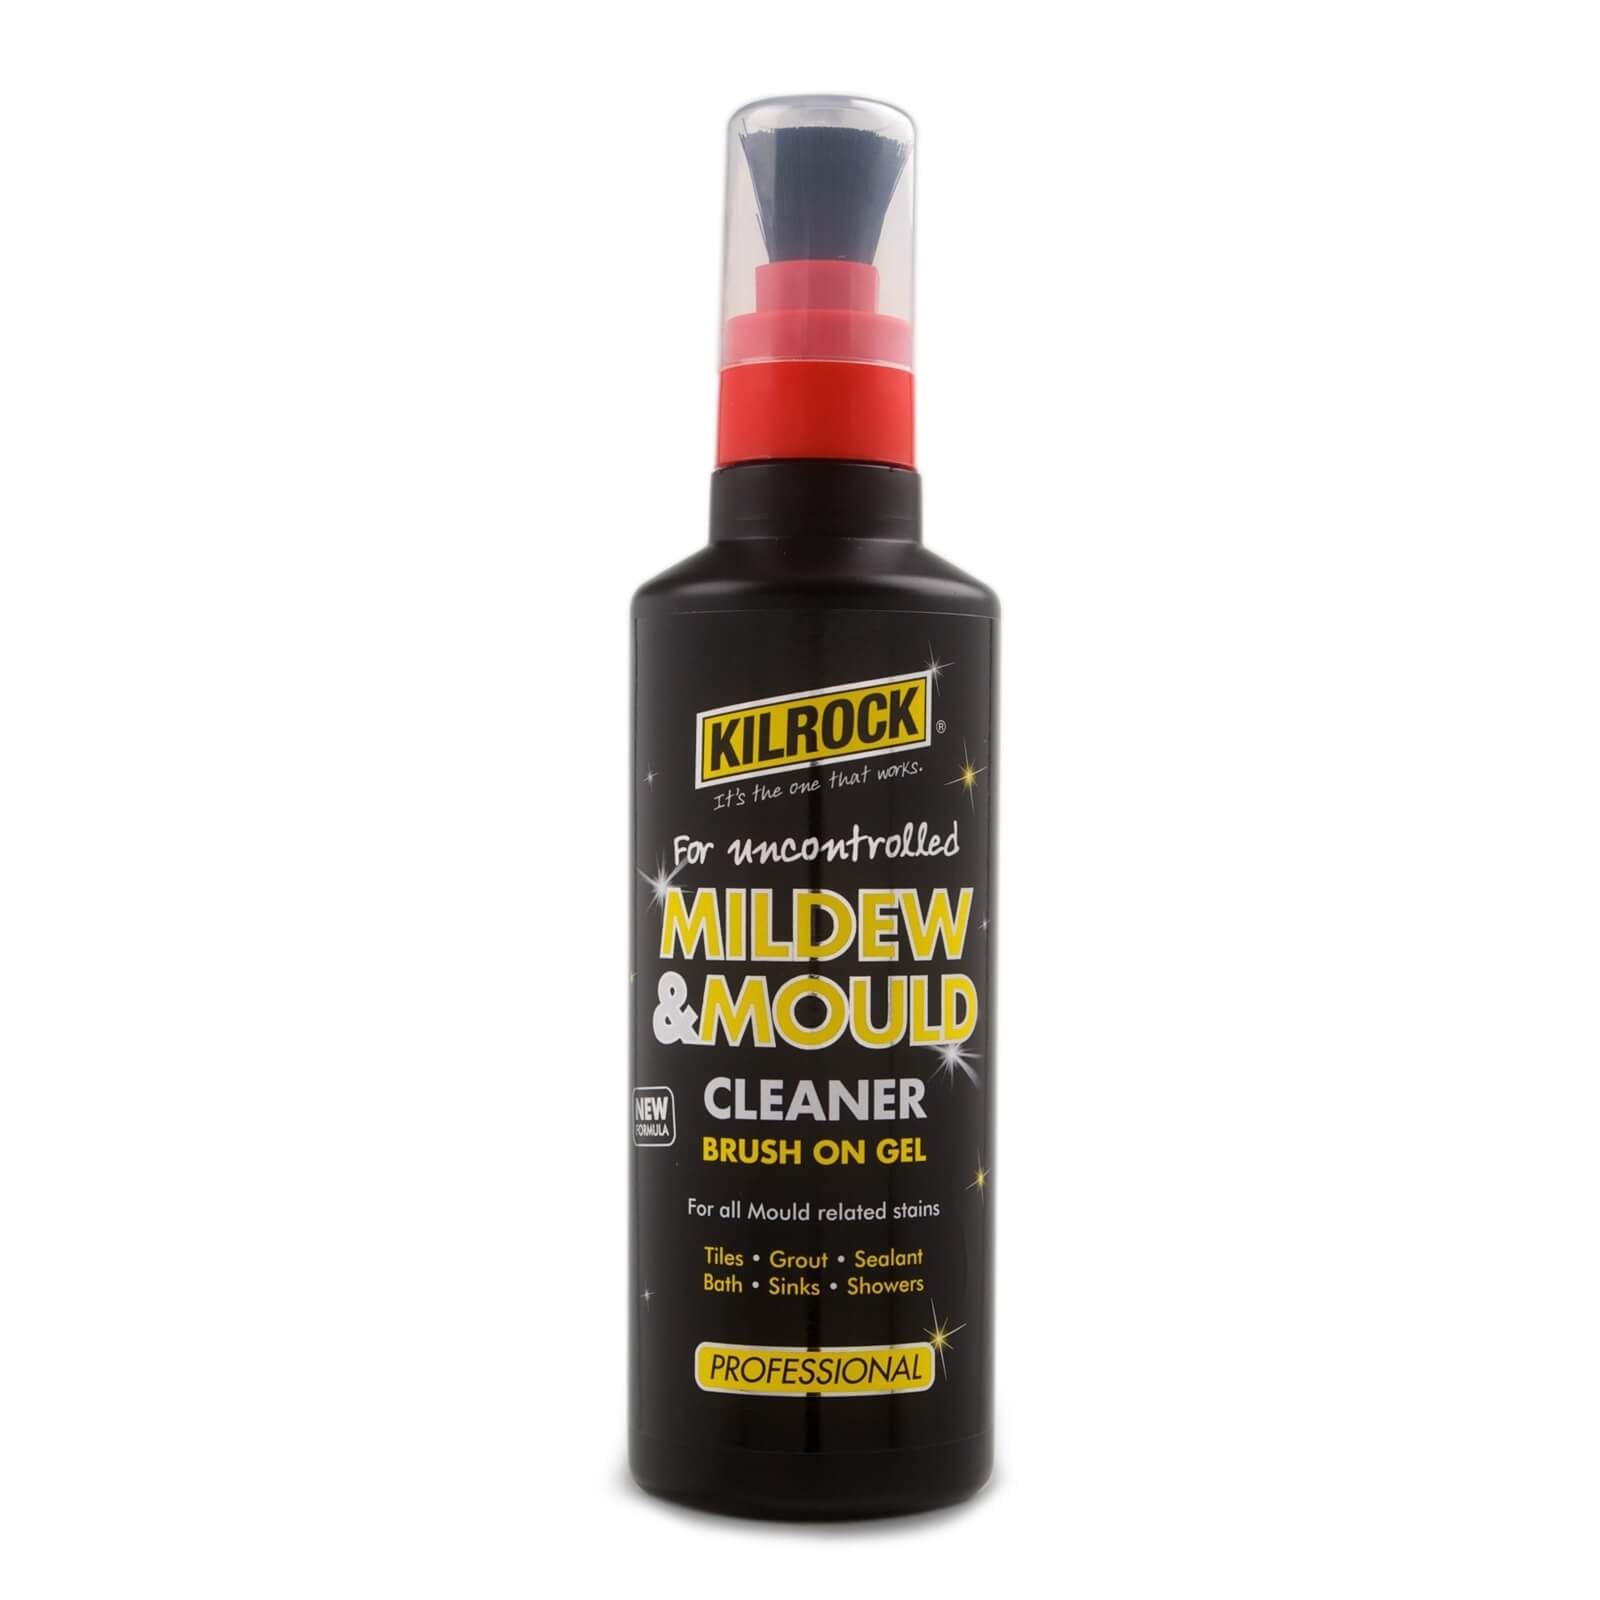 Kilrock Mildew and Mould Cleaner